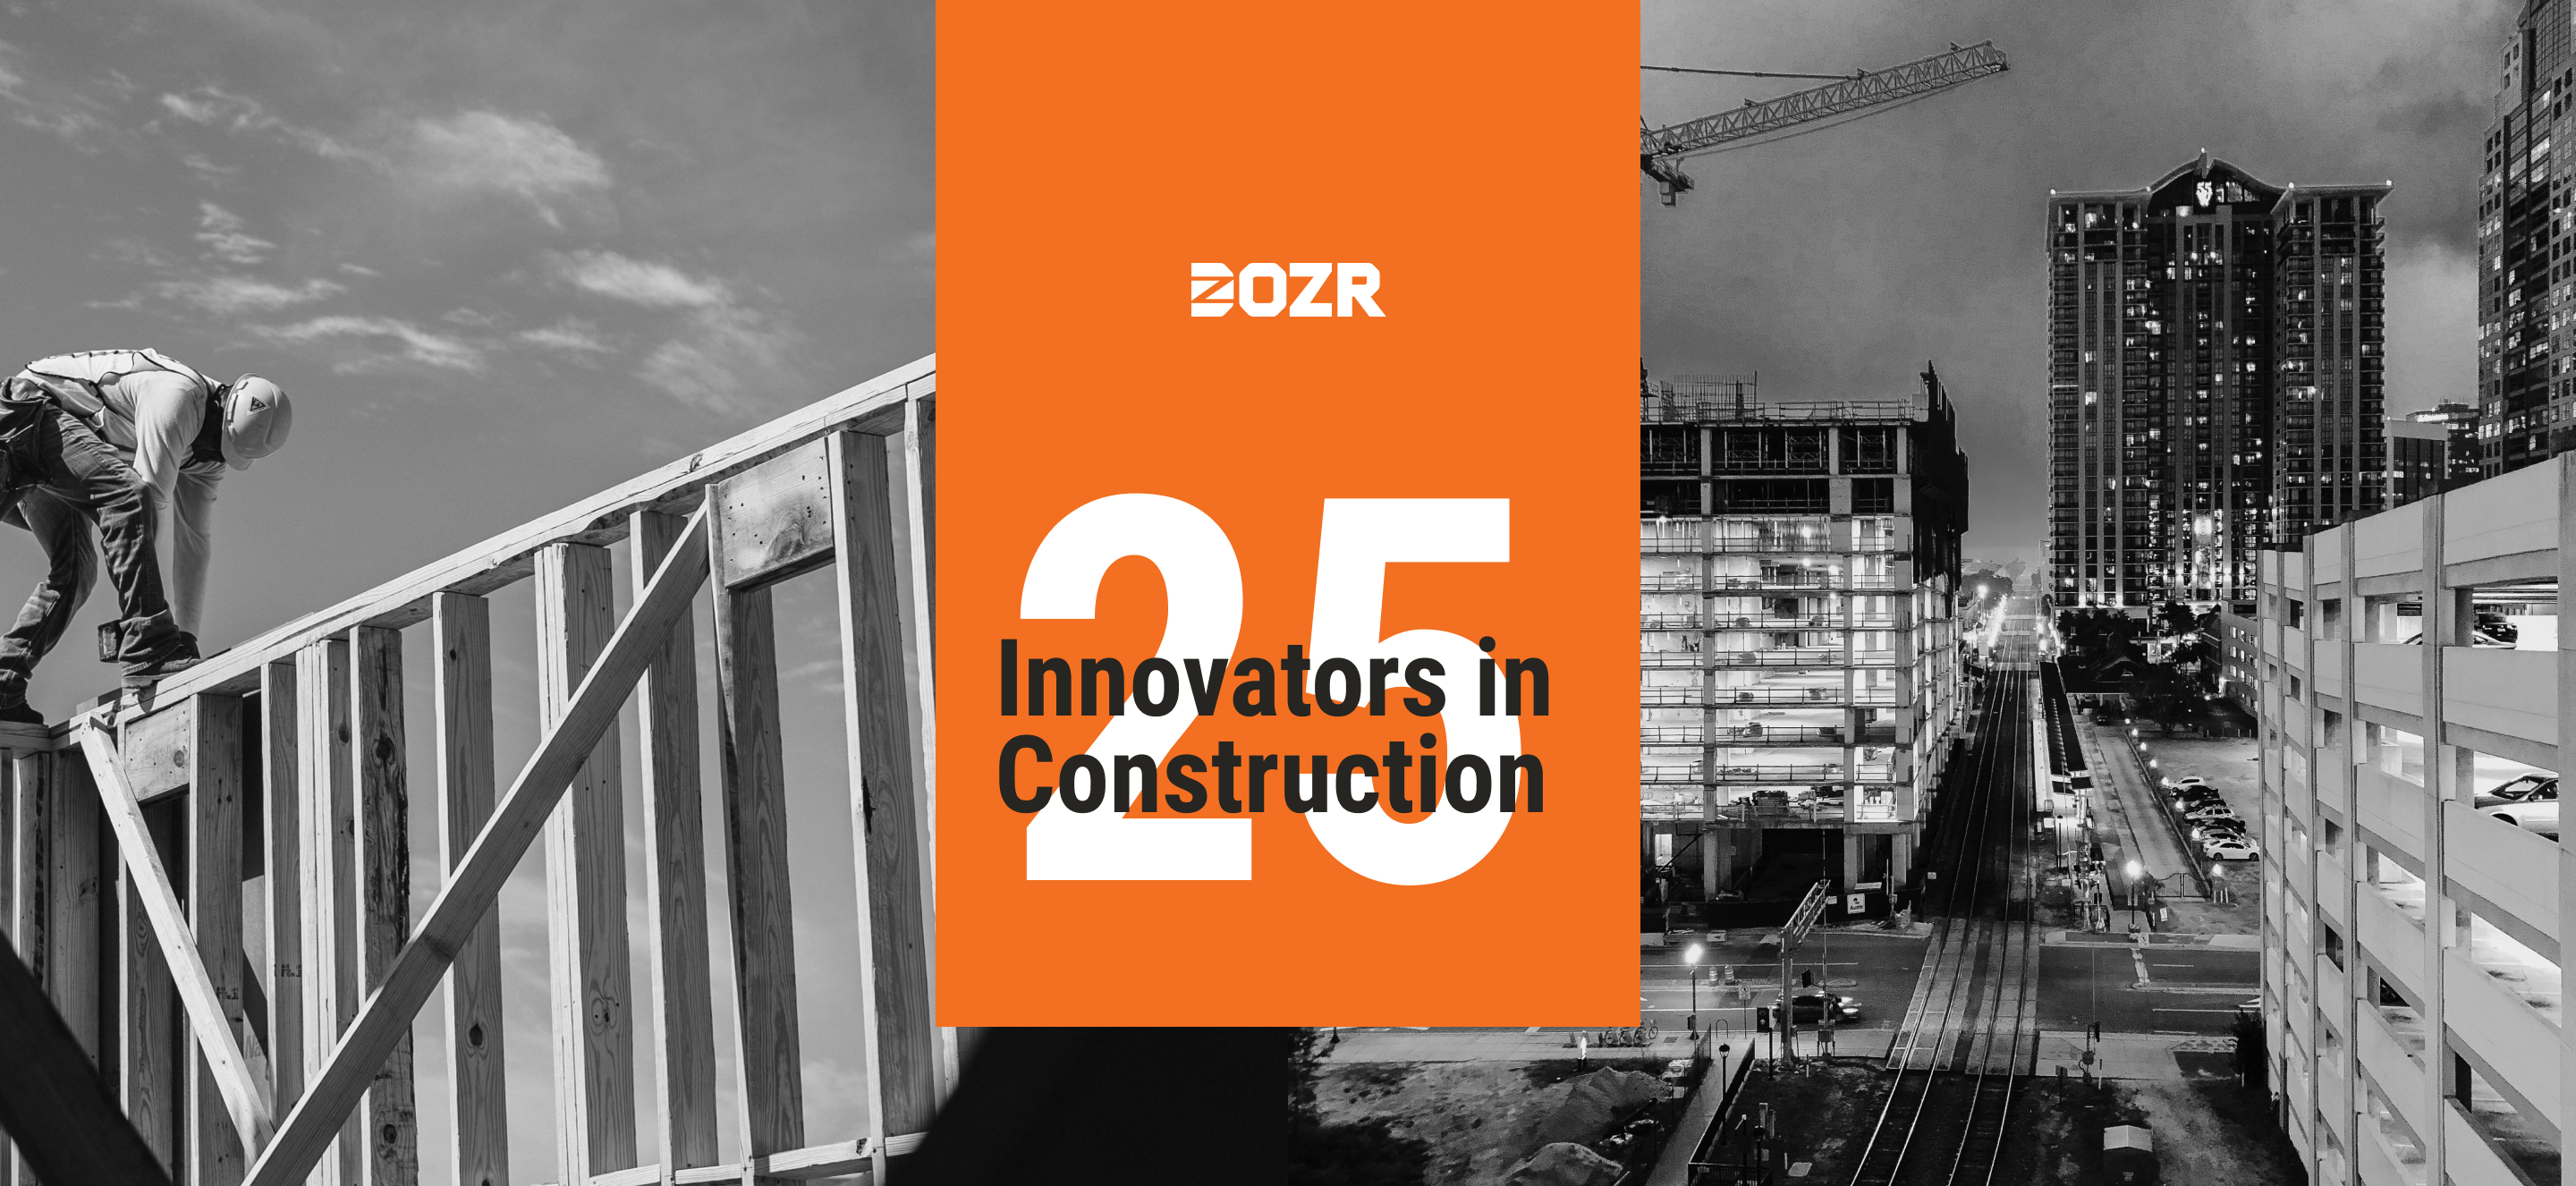 DOZR named one of the top 25 Innovators in Canada